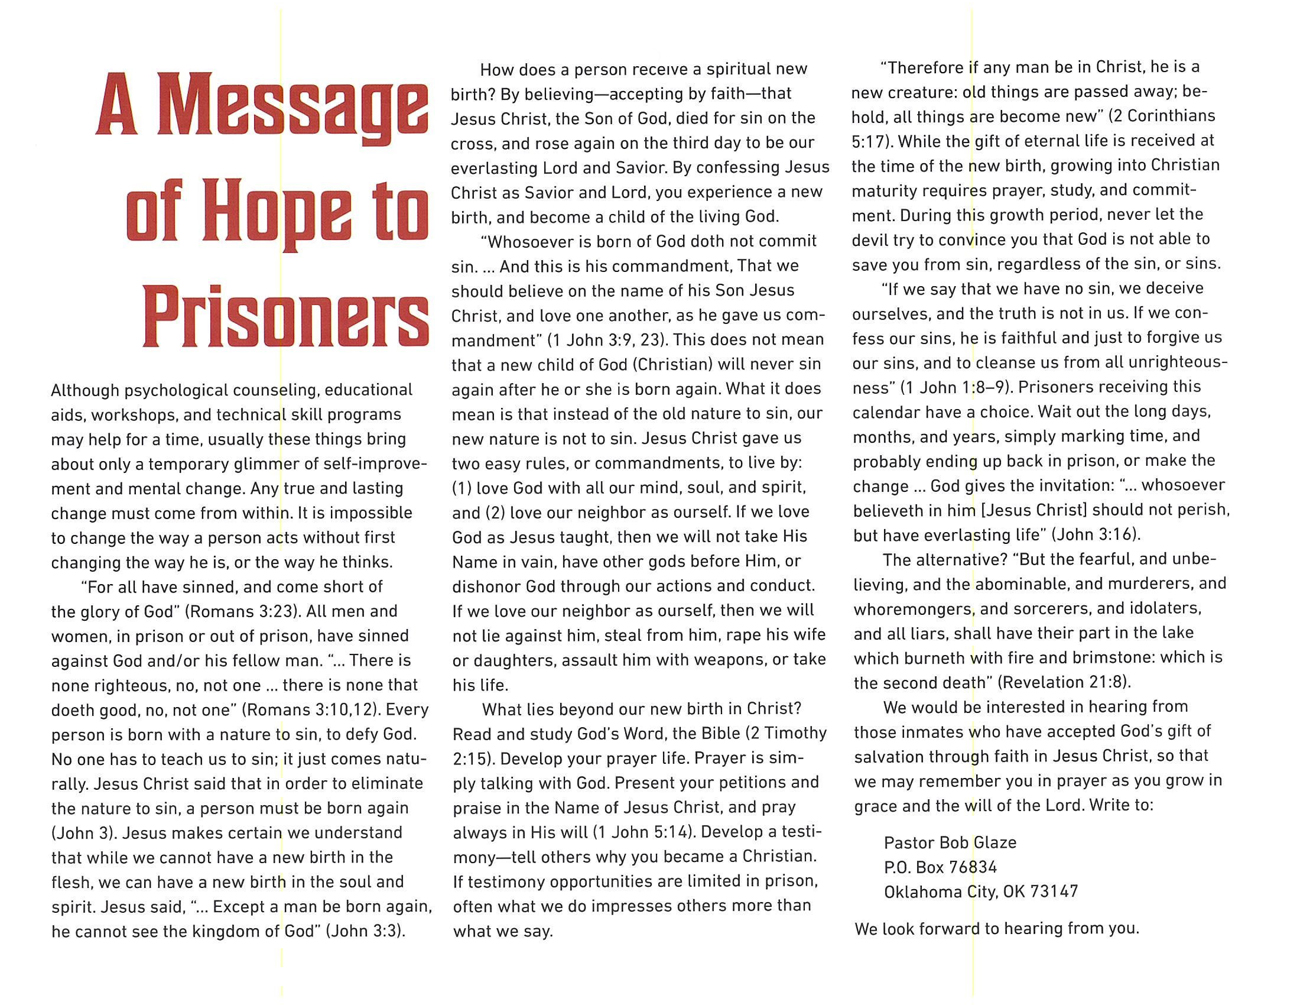 2021 Prophecy Calendar: A Message of Hope to Prisoners